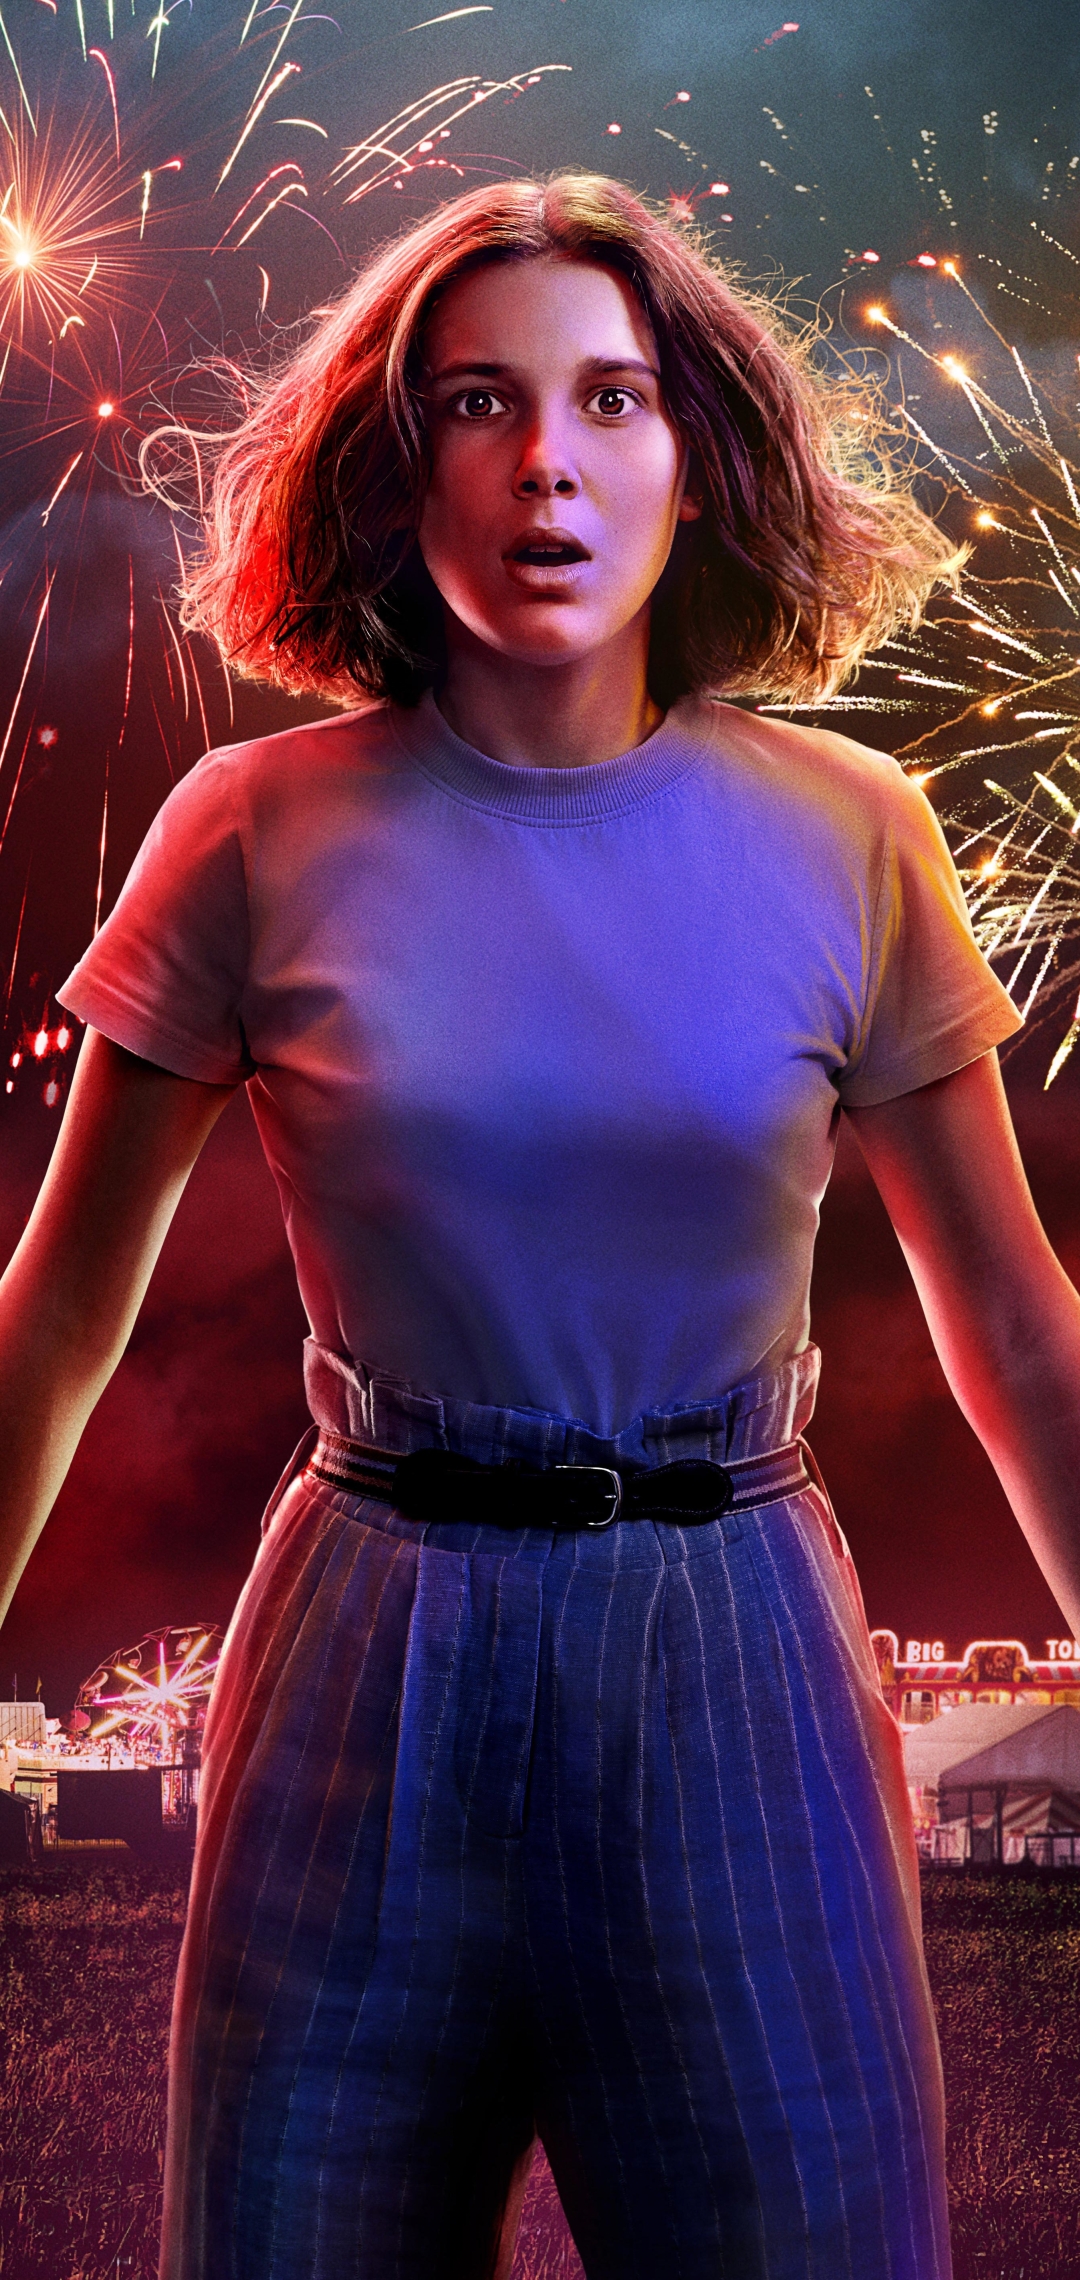 1080x2280 Millie Bobby Brown As Eleven Stranger Things 3 Poster One